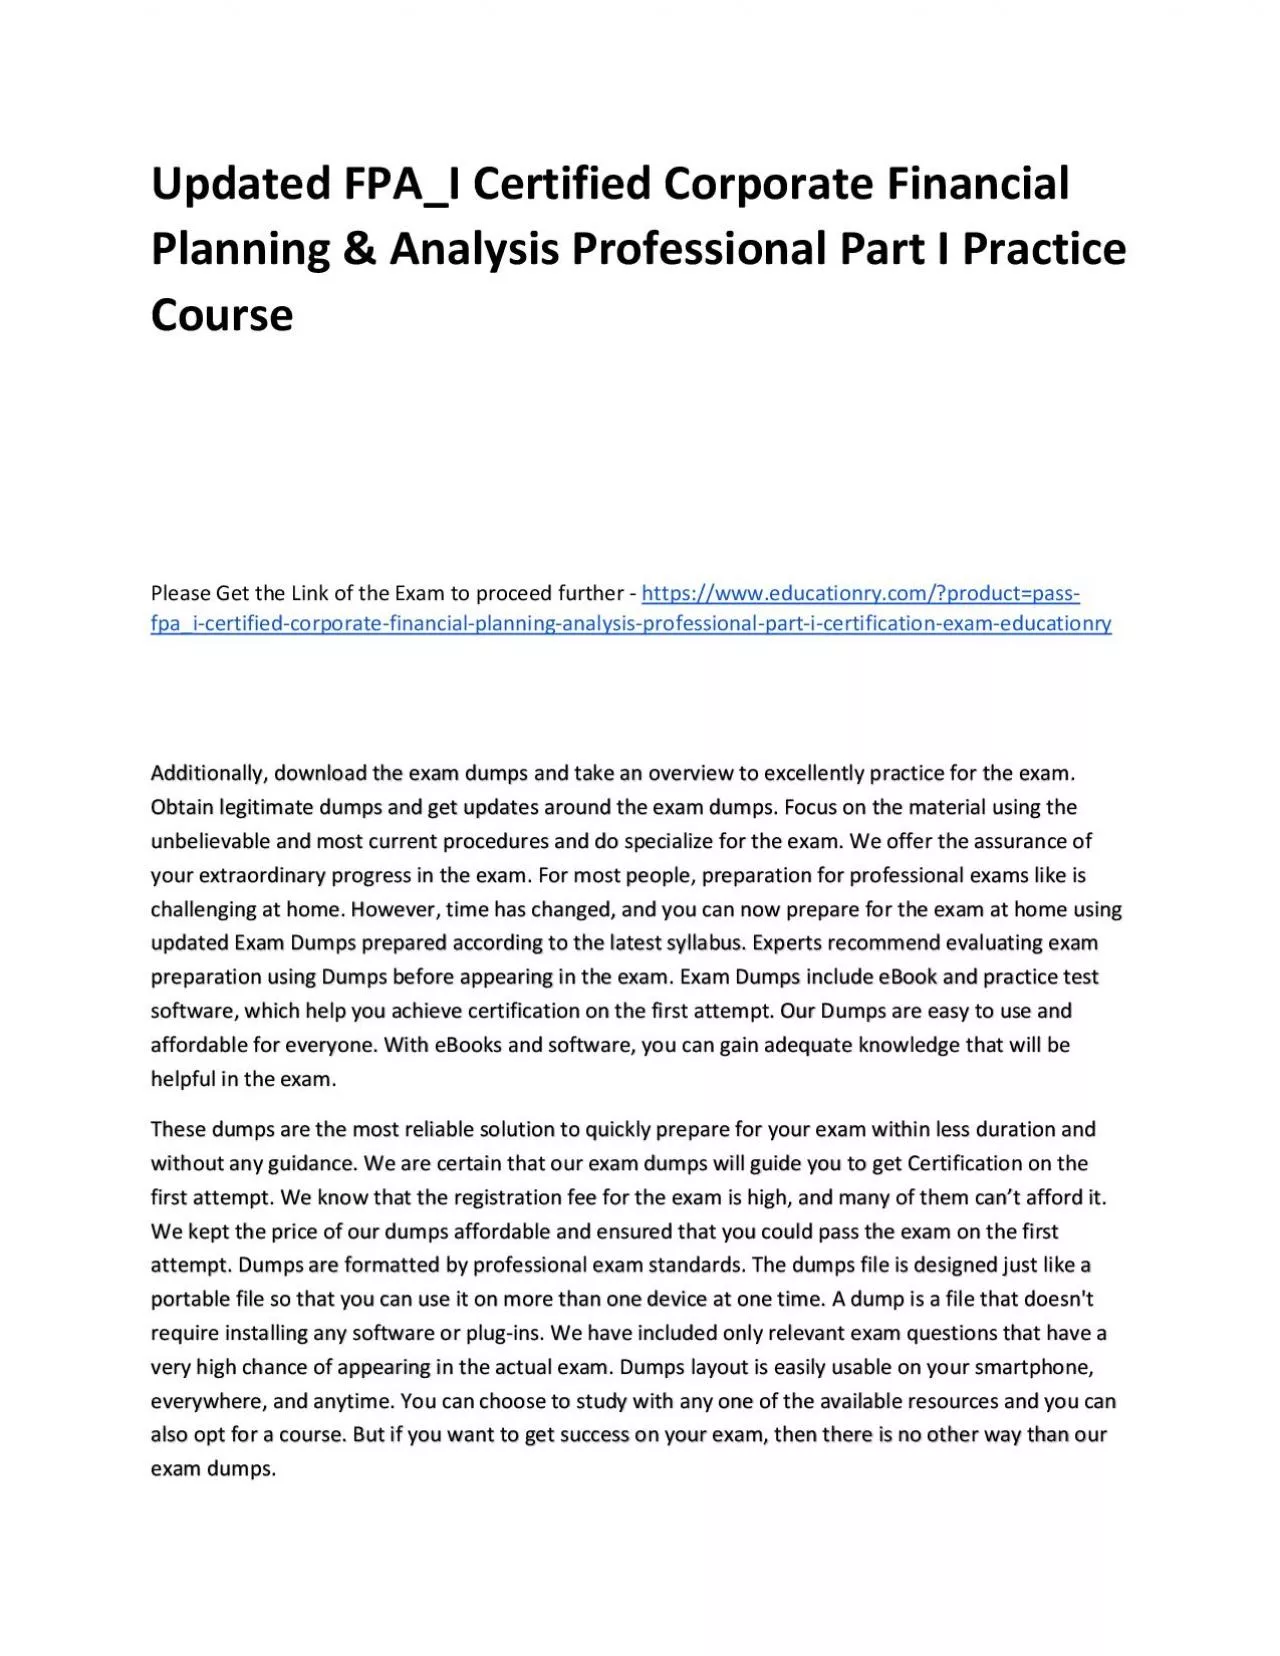 Updated FPA_I Certified Corporate Financial Planning & Analysis Professional Part I Practice